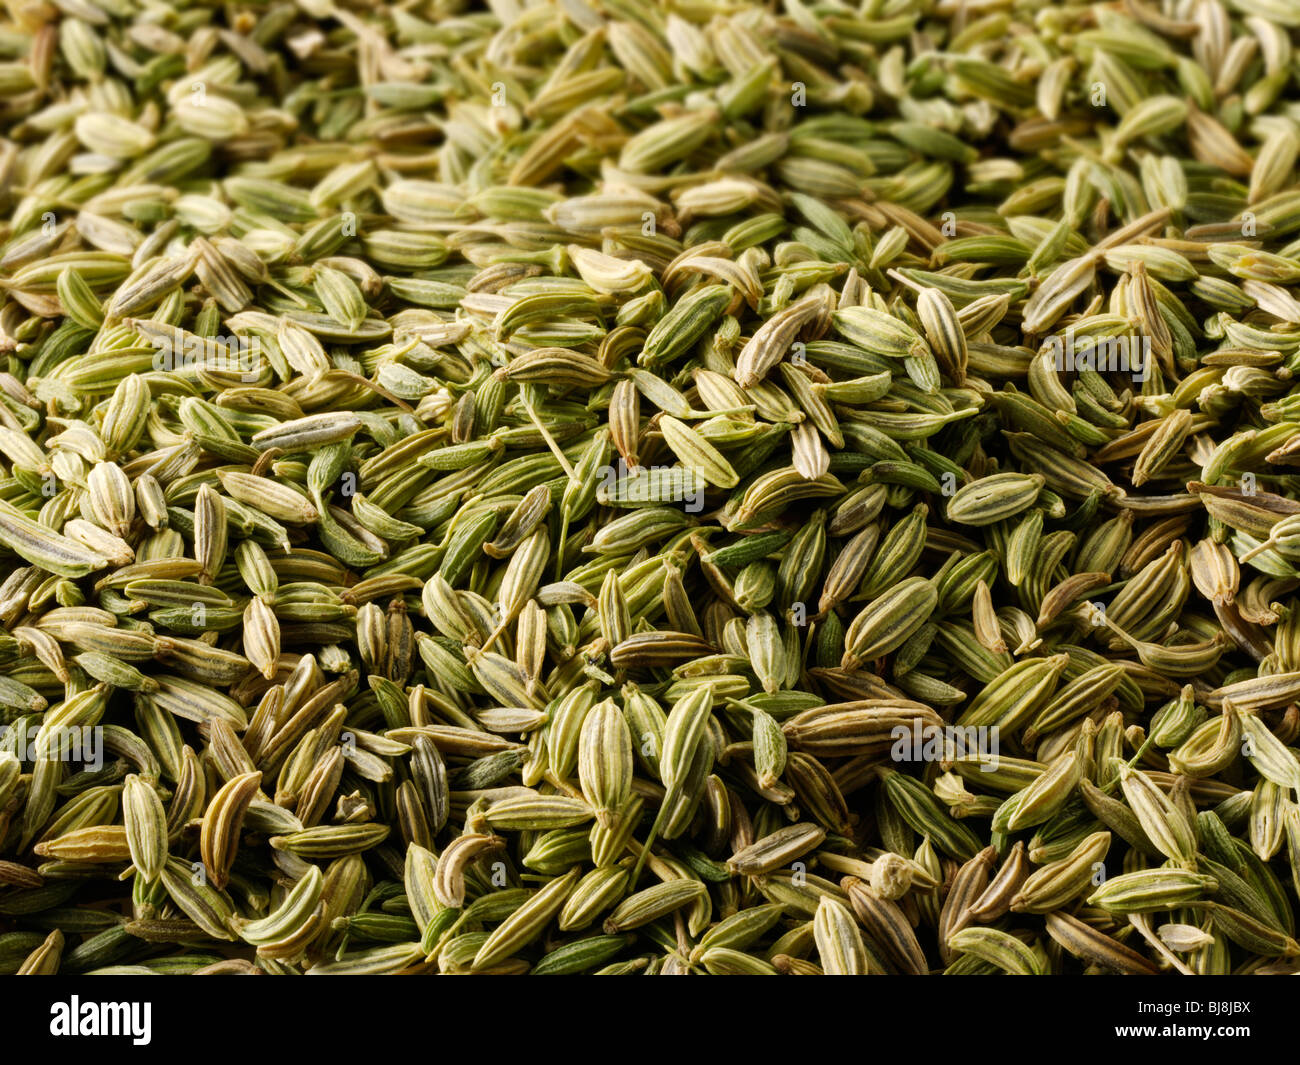 Whole fennel seeds , close up full frame Stock Photo